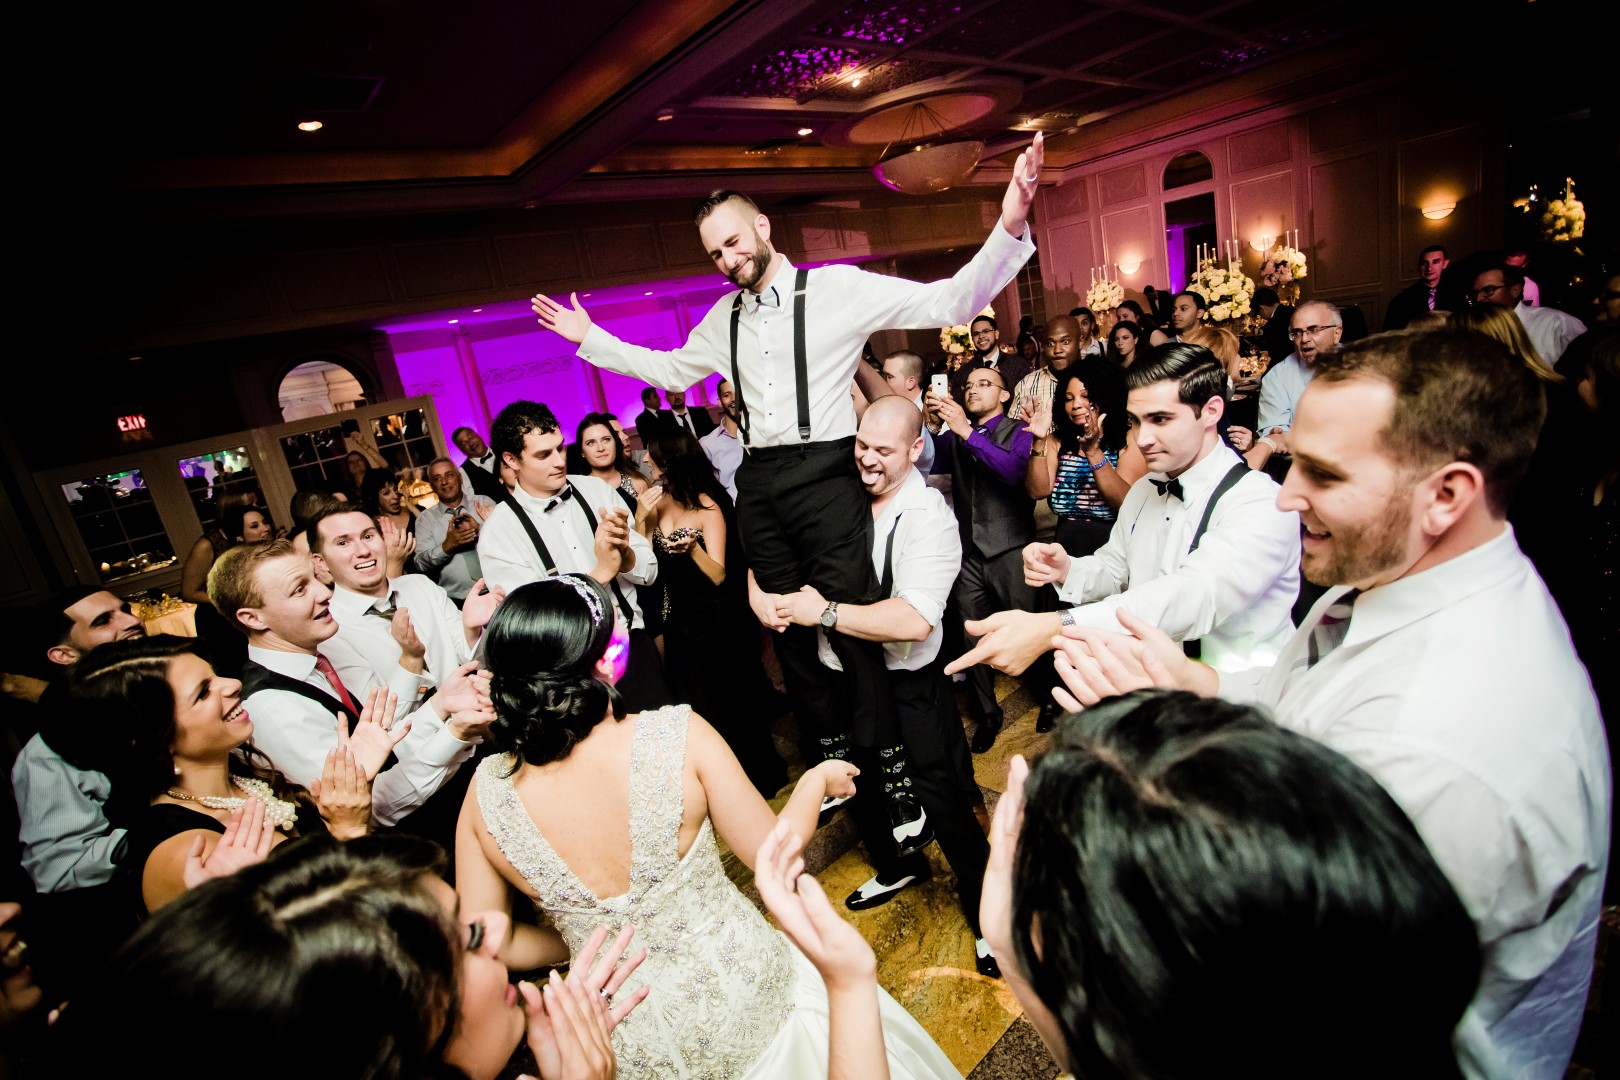 What's With The Garter Toss During The Reception?